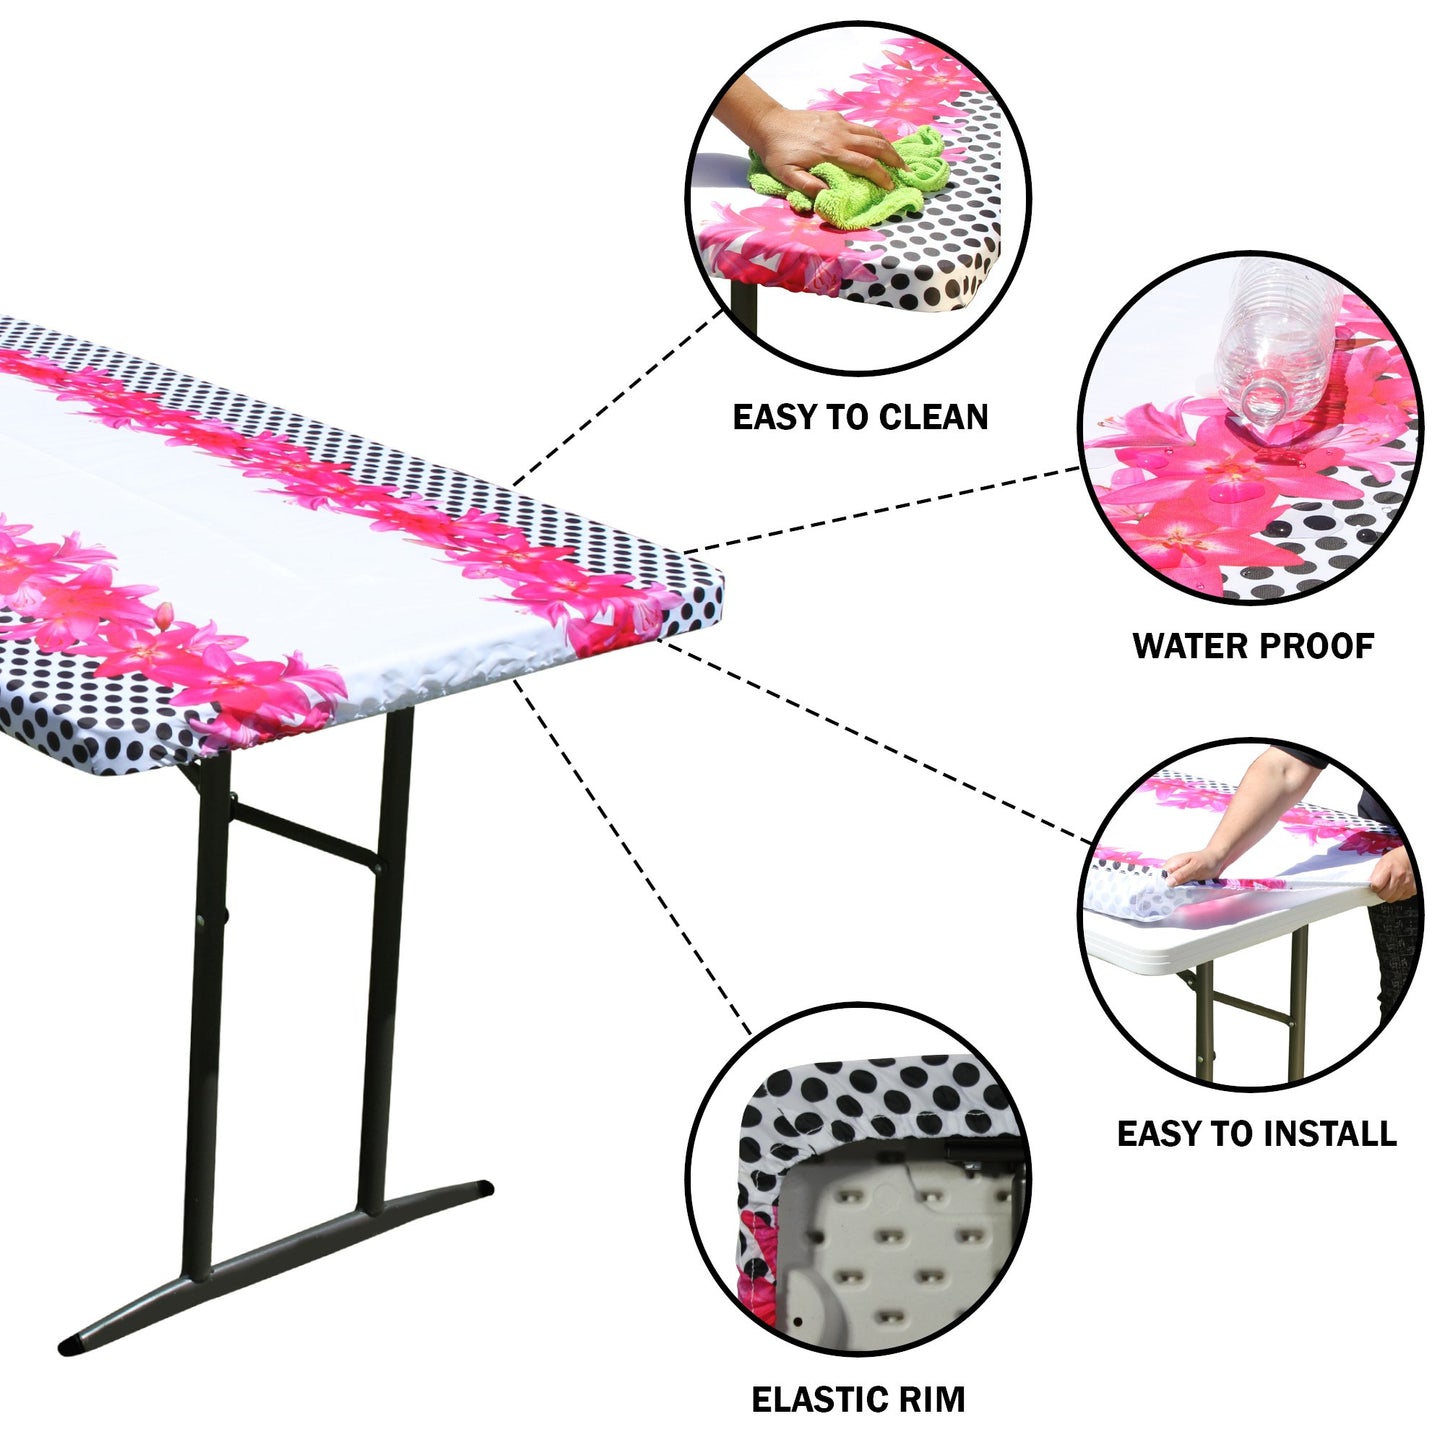 TableCloth PLUS 72" Lilies Fitted Polyester Tablecloth for 6' Folding Tables is easy to clean, water proof, easy to install, and has an elastic rim